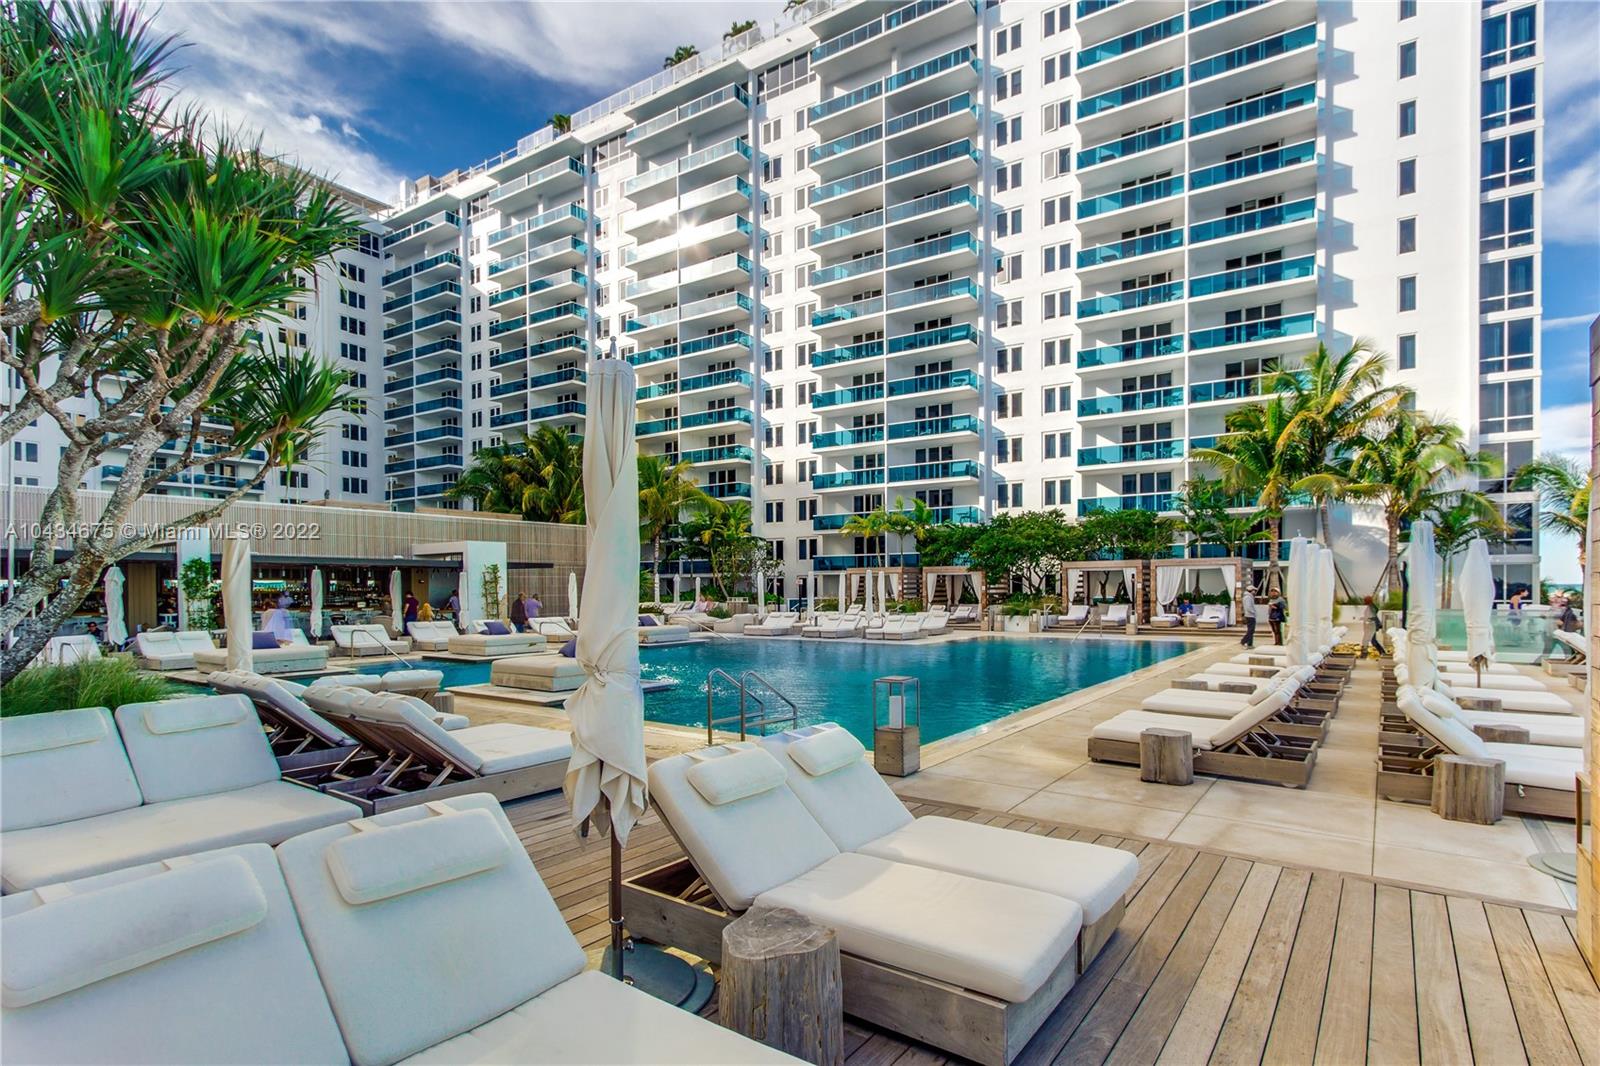 Beautifully finished and furnished, 970 square feet 1 bed/1.5 bath at the new 1 Hotel + Homes. Highly desirable 13 line w/wide open ocean views. Great amenities including 4 pools, valet, private owner's lobby separate from hotel entrance and the best restaurants in South Beach.